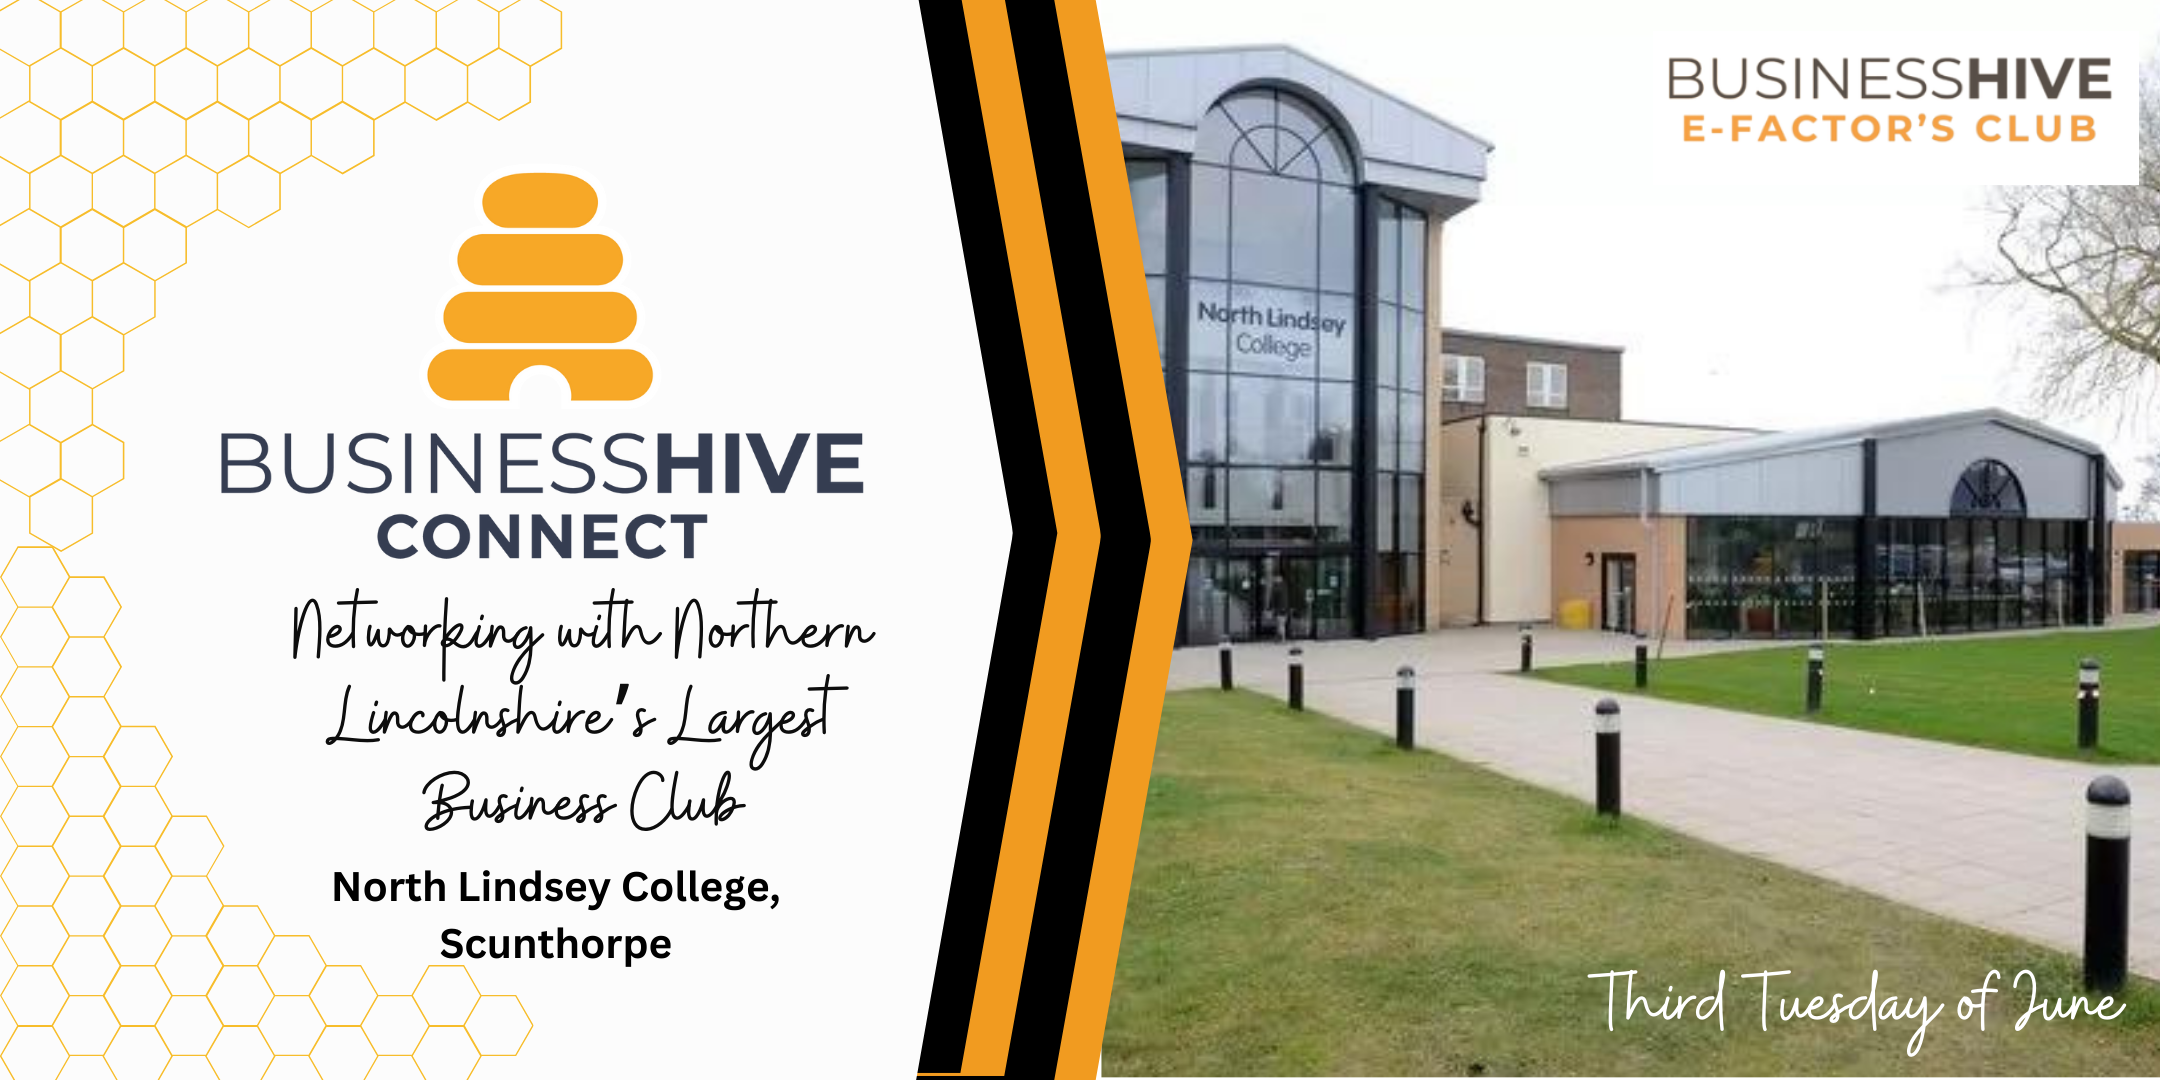 Promotional image for Business Hive Connect event at North Lindsey College, Scunthorpe, featuring the college building and event details.